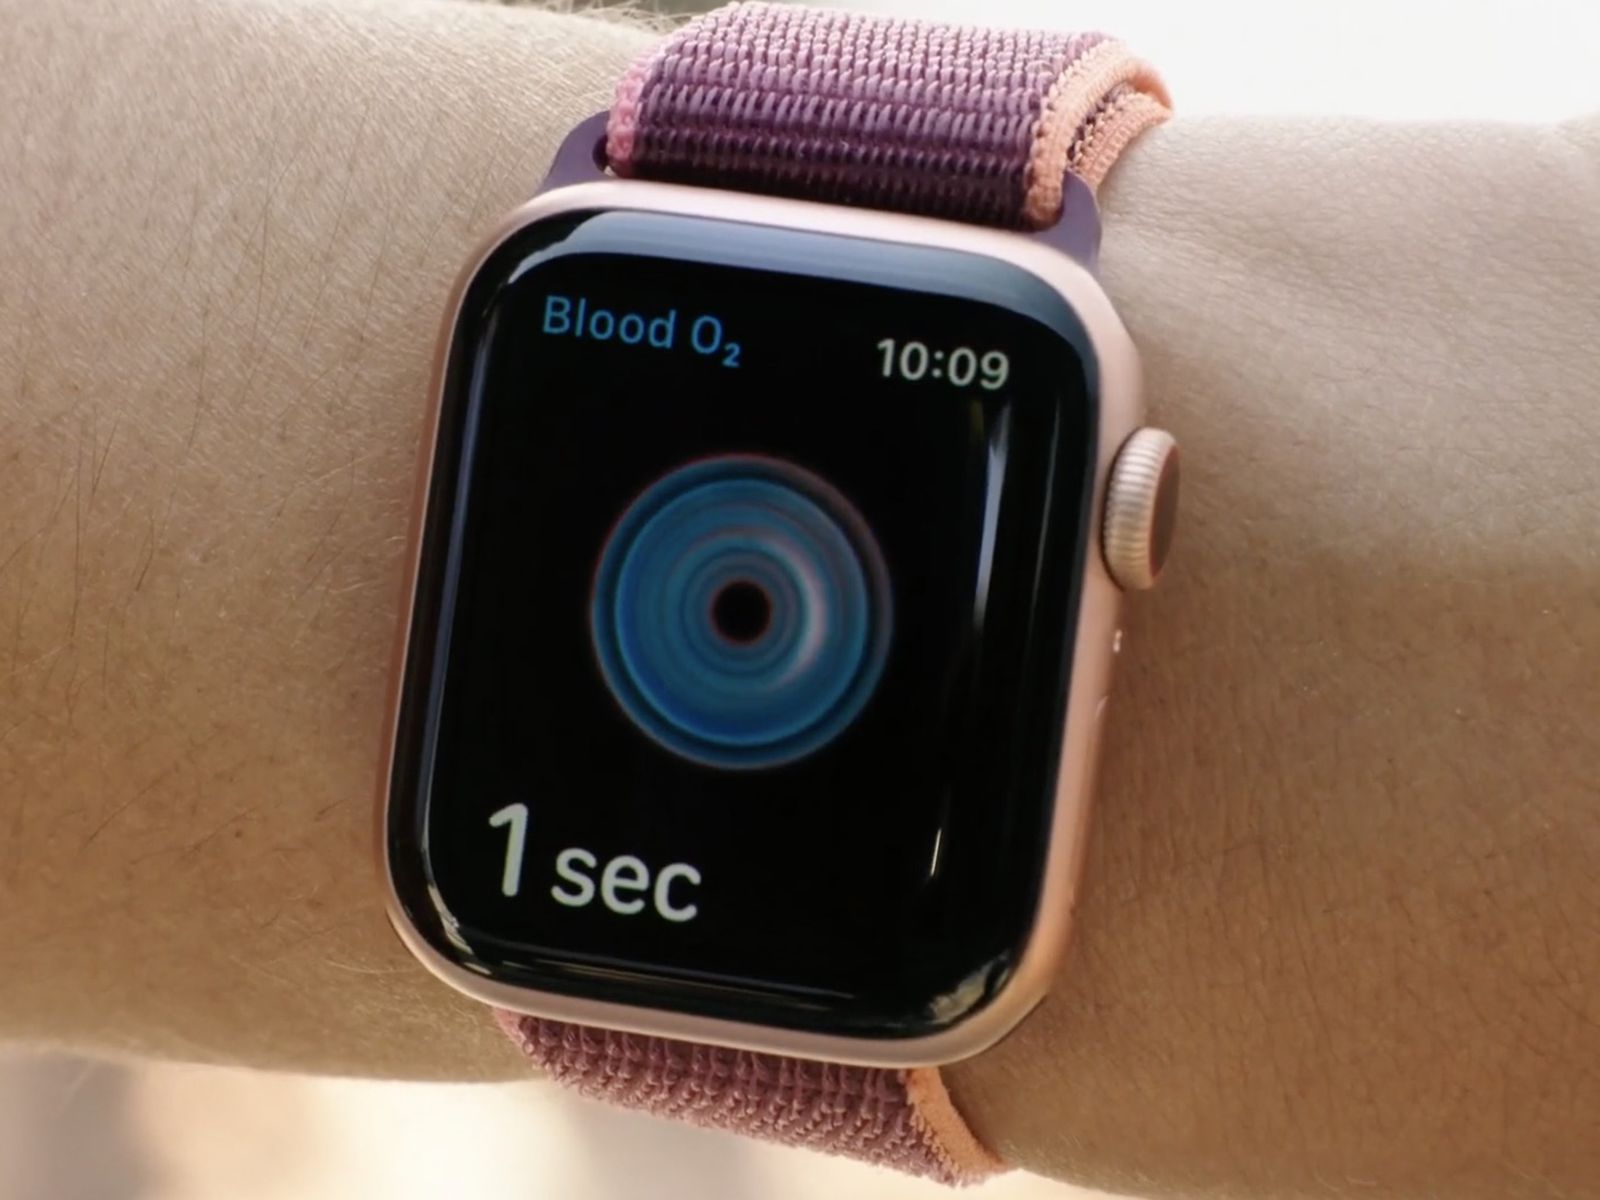 Apple Watch may track blood sugar levels, other health features